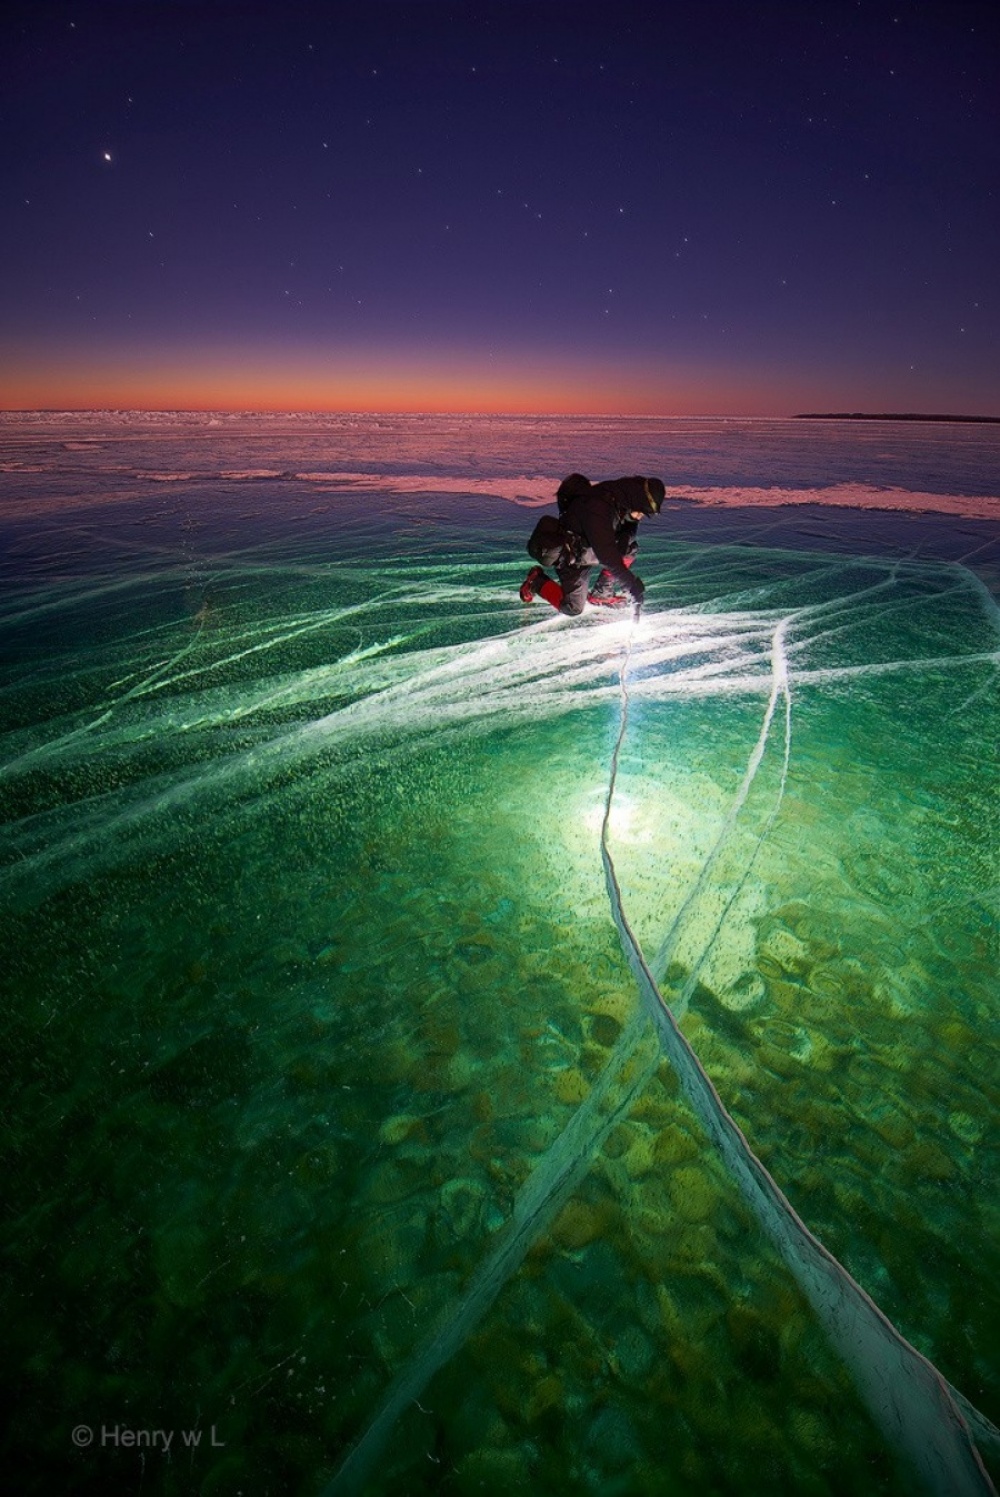 The 100 best photographs ever taken without photoshop - Man with Flashlight on Ice creates Beauty